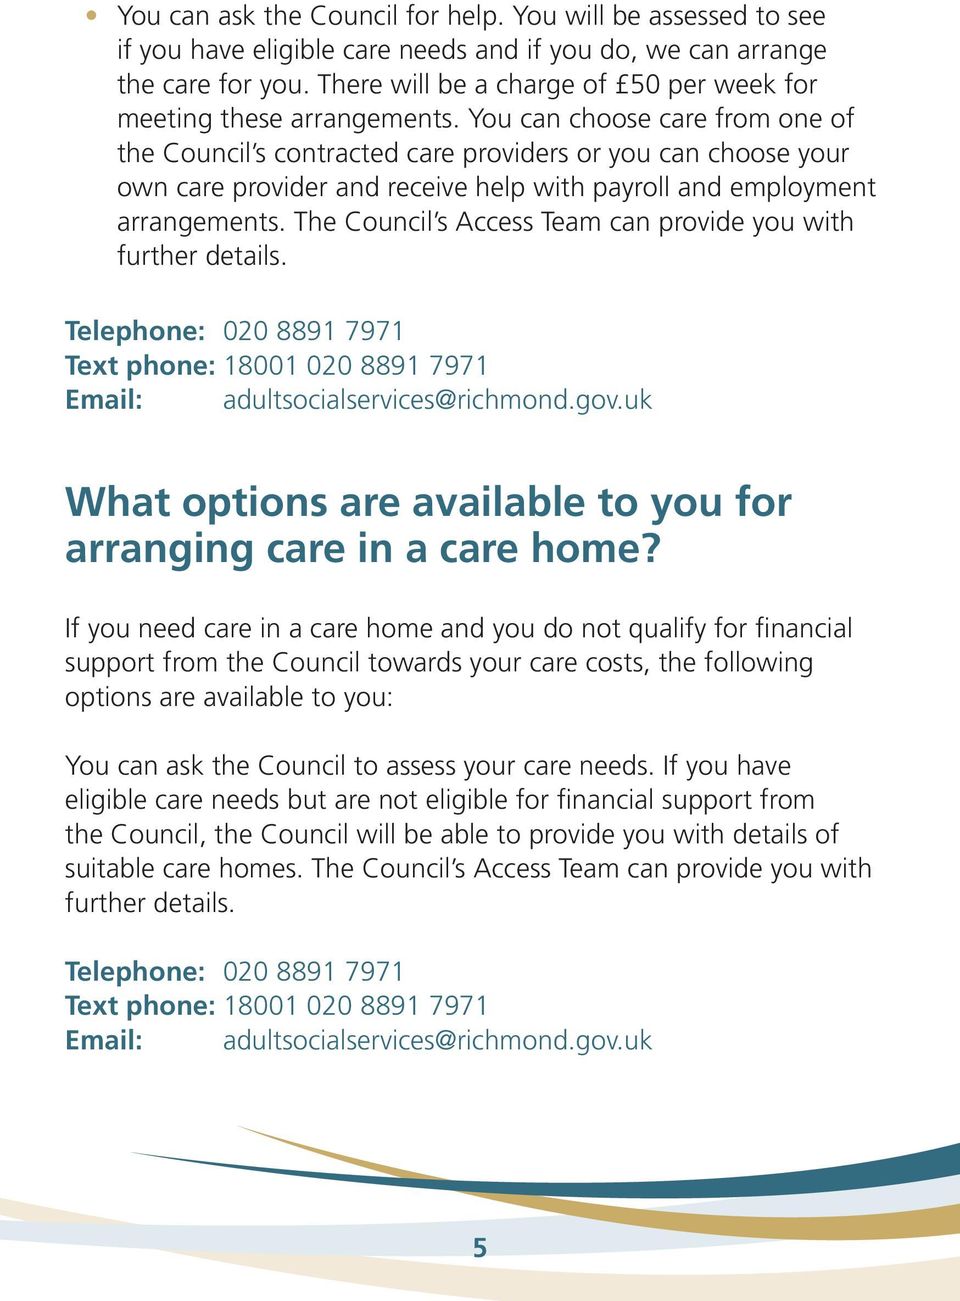 You can choose care from one of the Council s contracted care providers or you can choose your own care provider and receive help with payroll and employment arrangements.